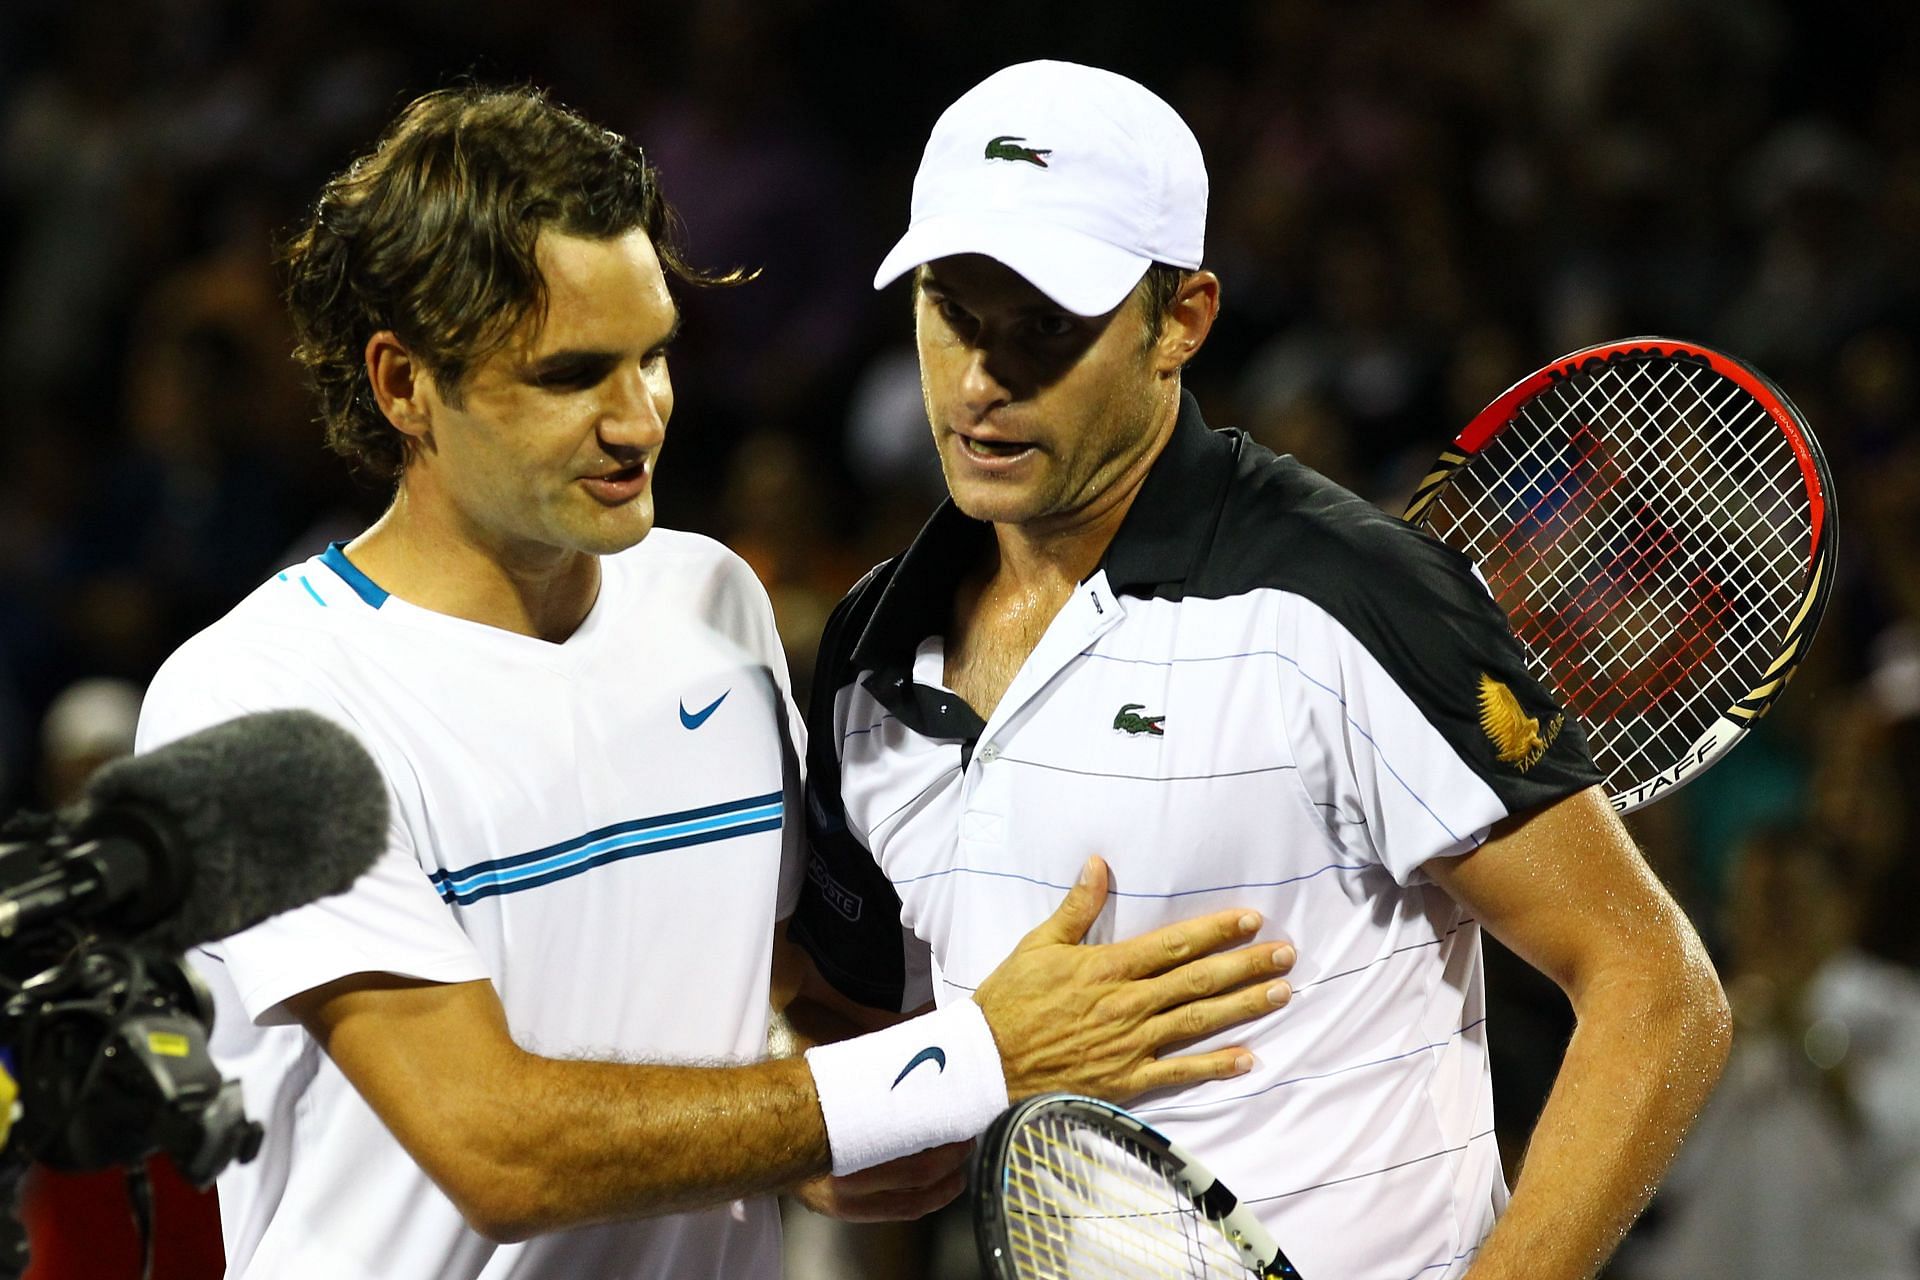 Roger Federer and Andy Roddick during their playing days. (Pic - Getty Images)